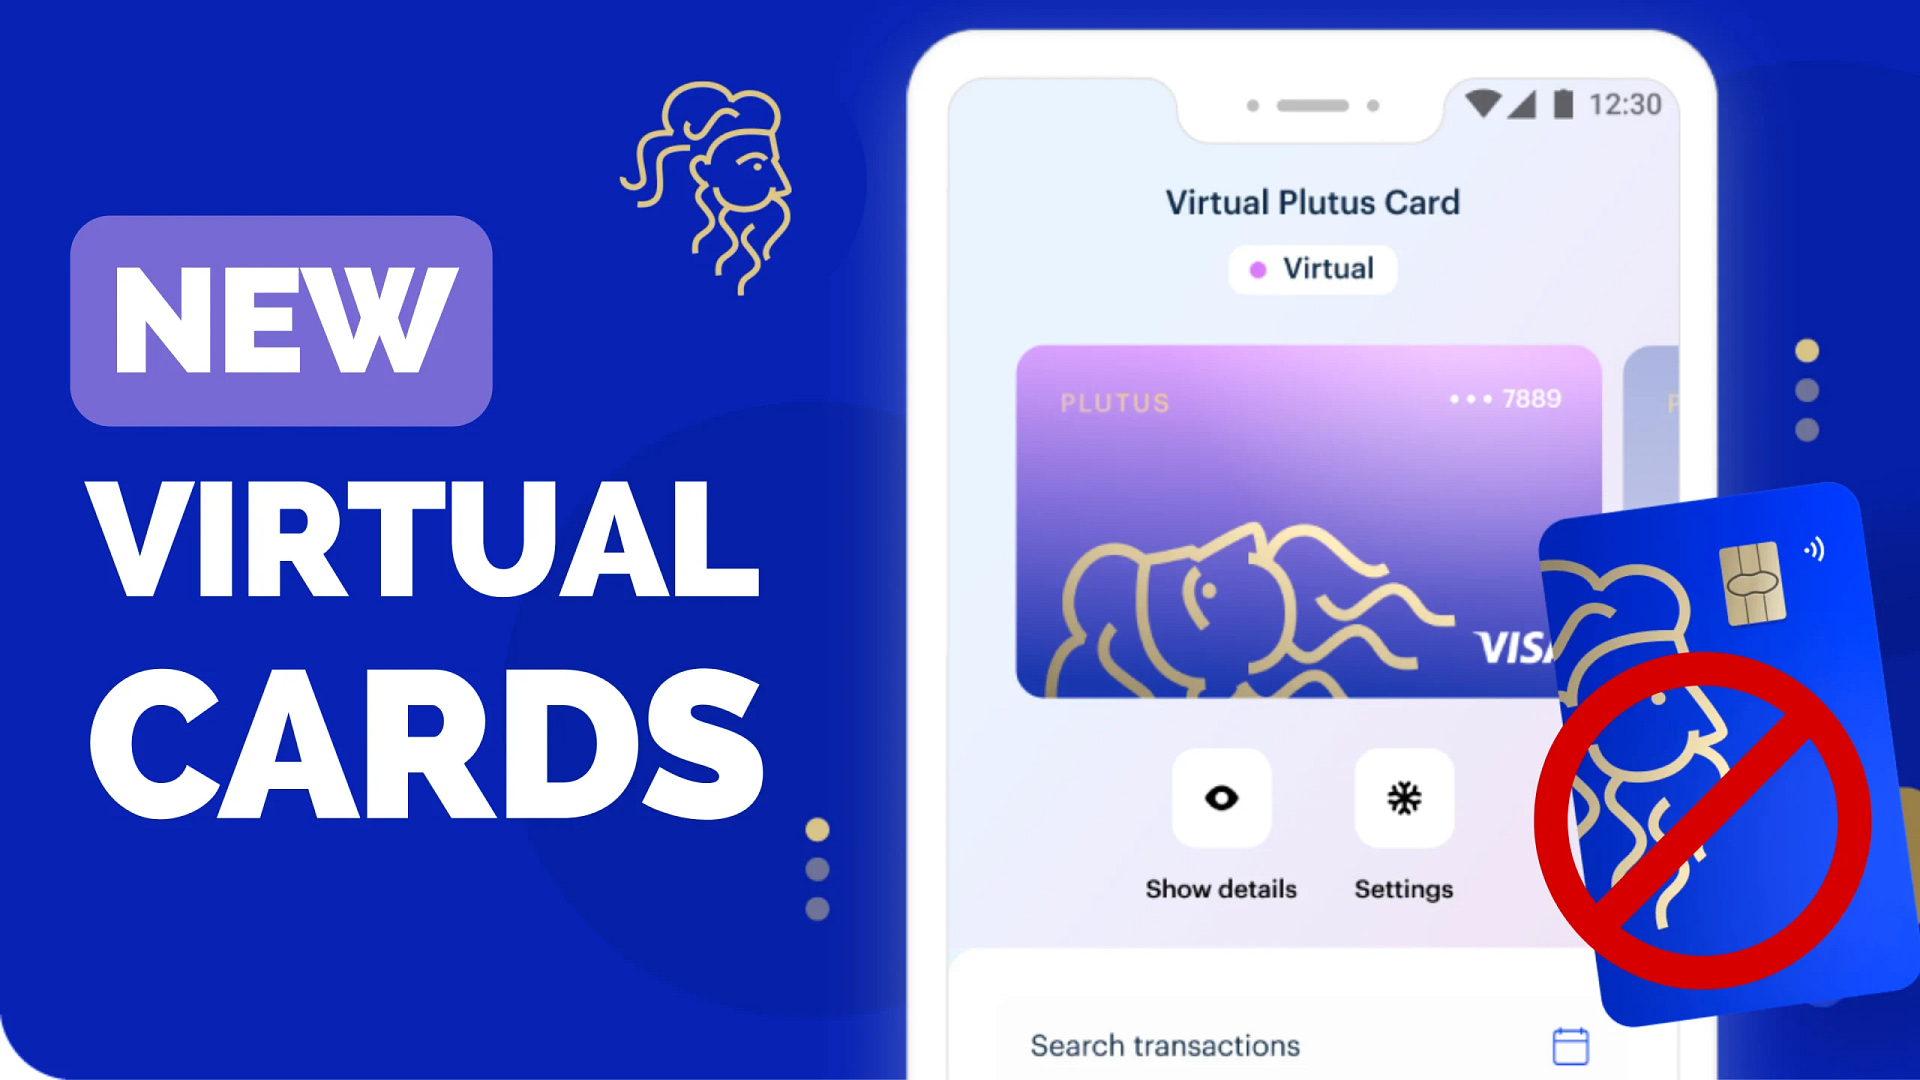 New Plutus virtual cards coming July 25th